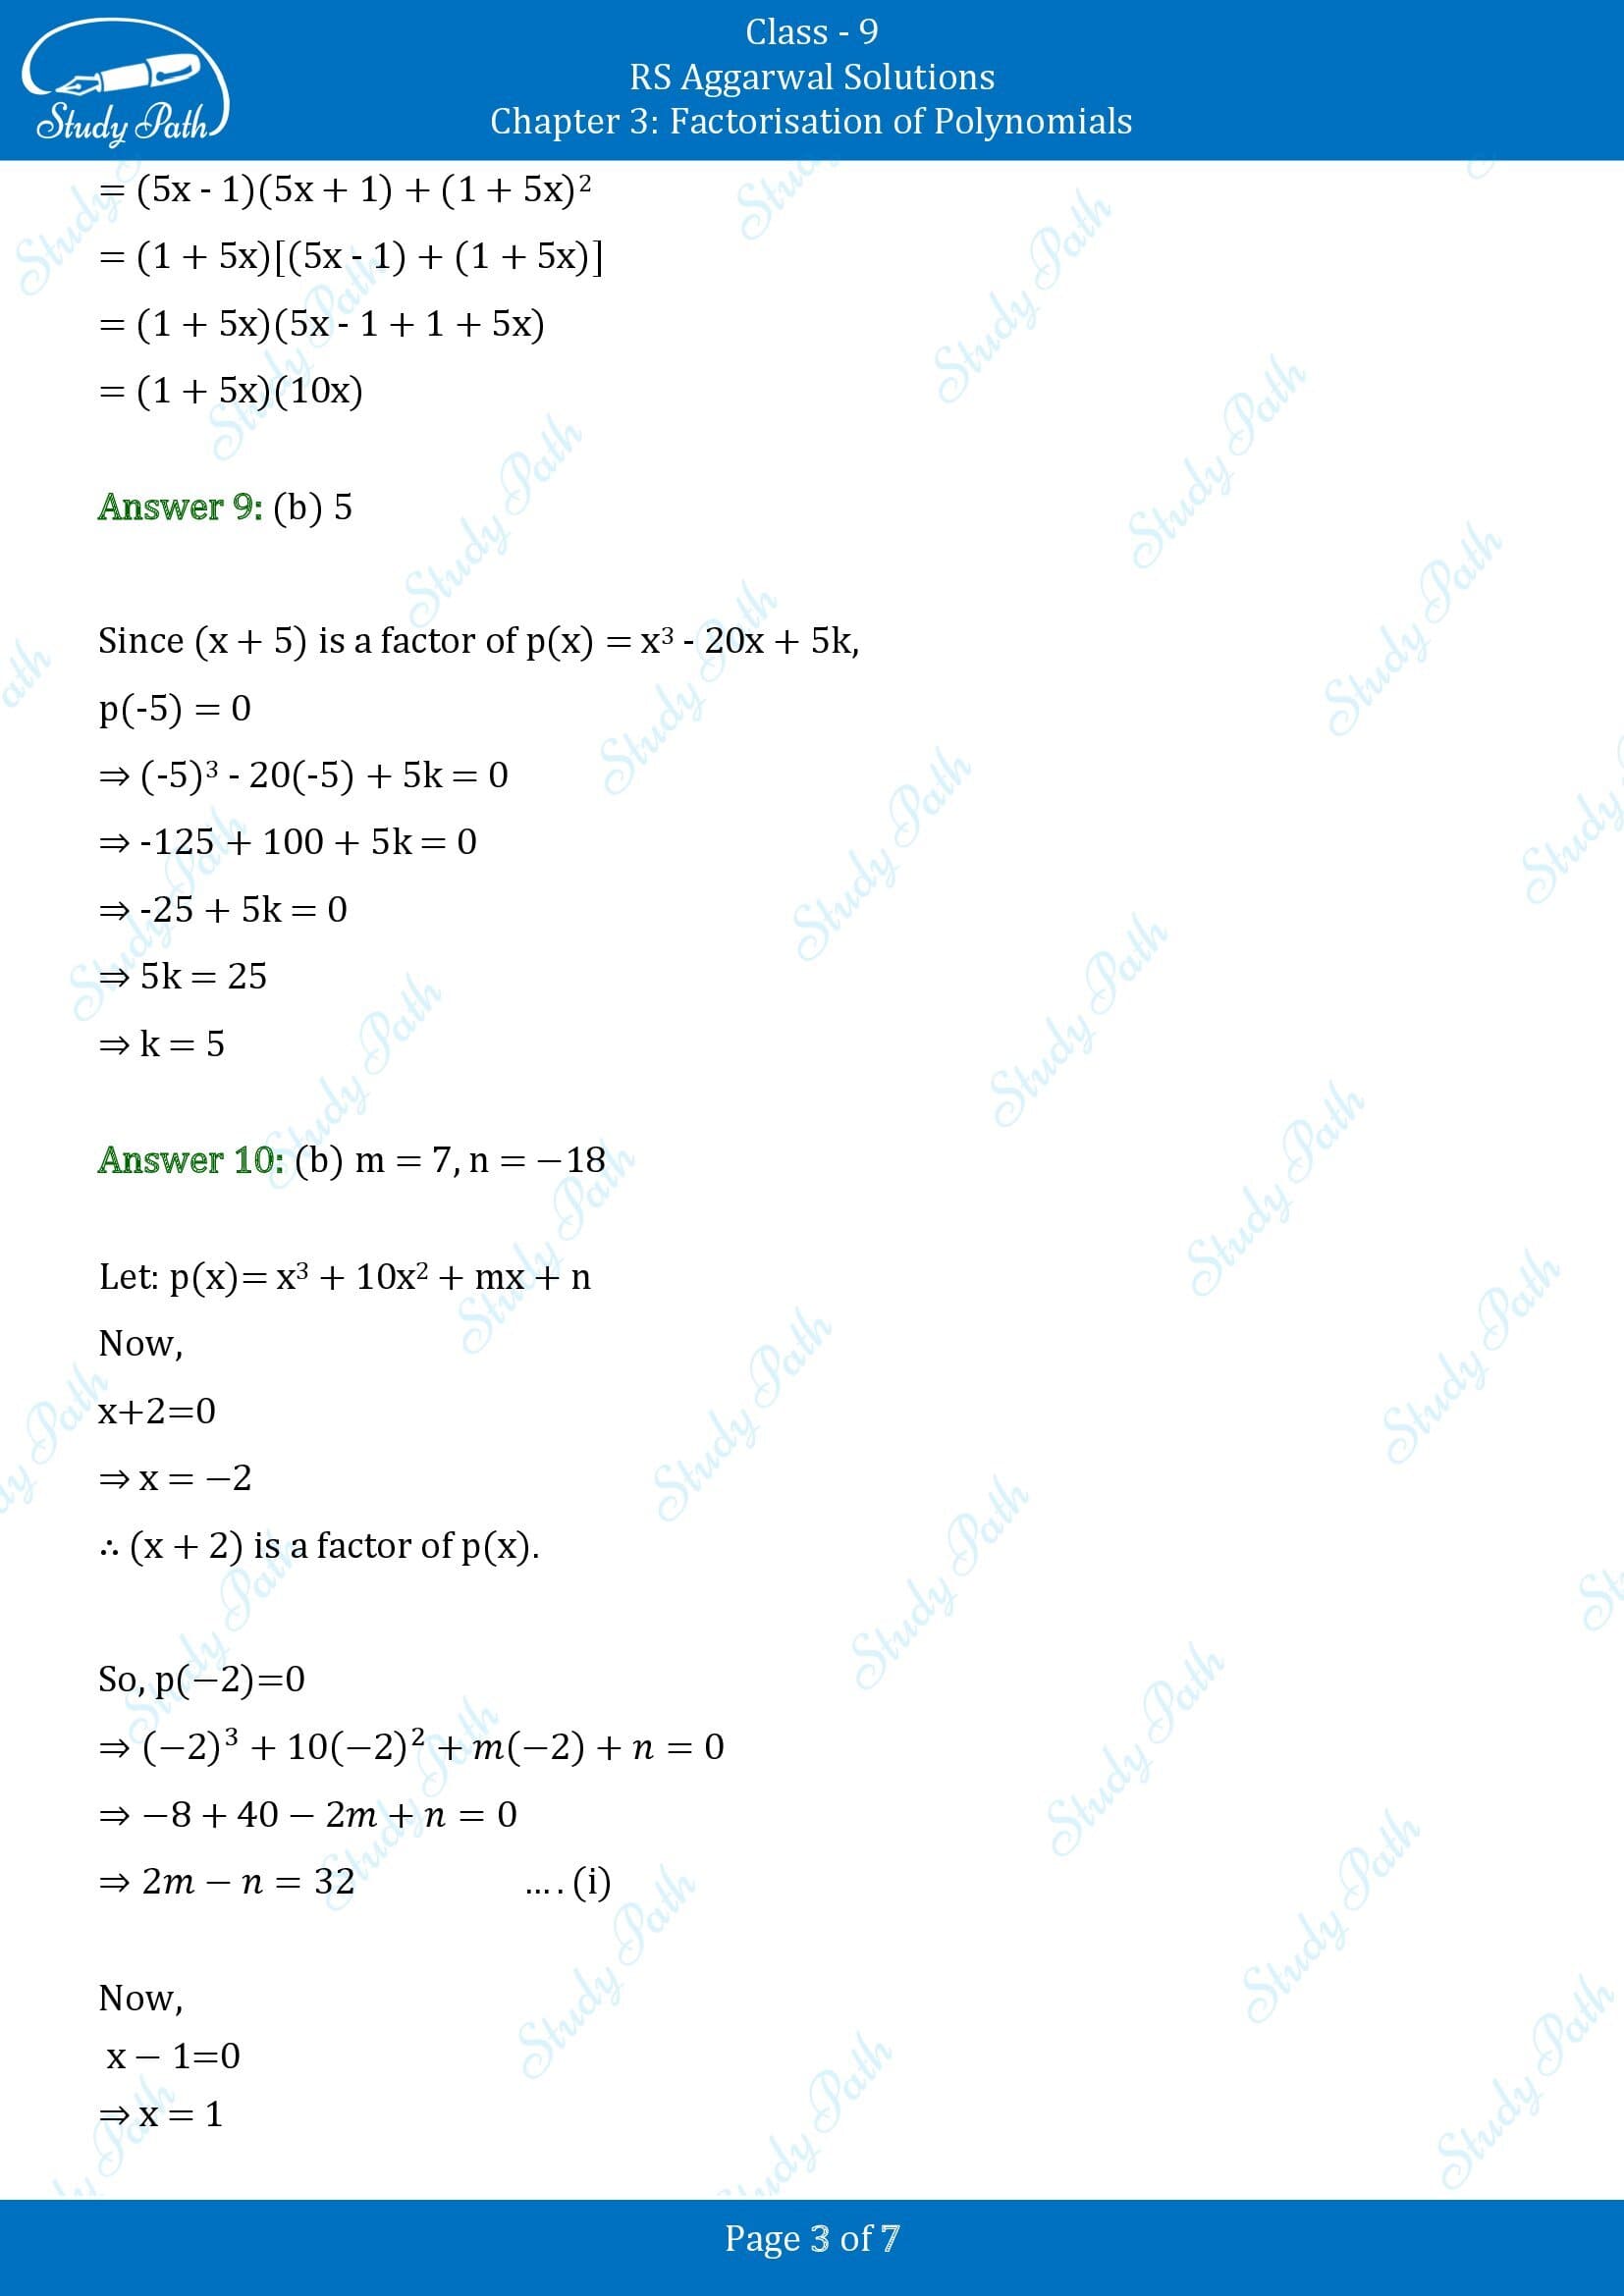 RS Aggarwal Solutions Class 9 Chapter 3 Factorisation of Polynomials Multiple Choice Questions MCQs 00003